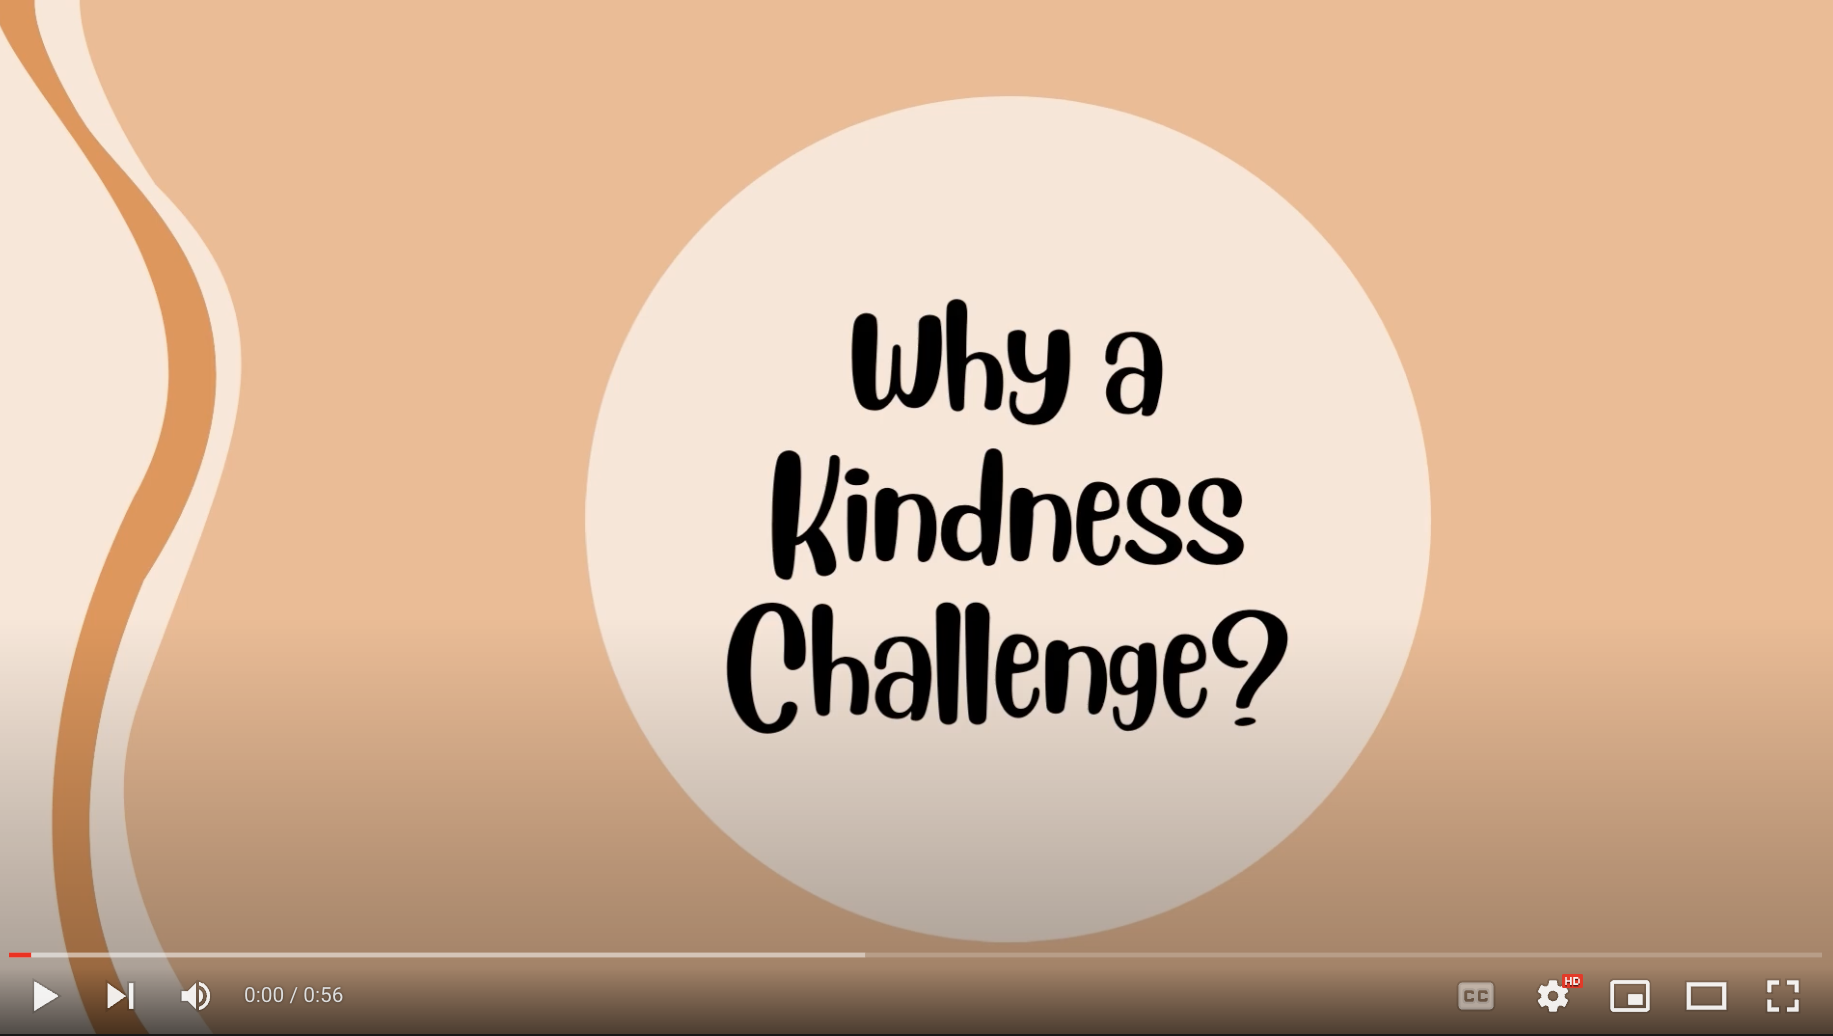 Why a Kindness Challenge text in a circle on an orange background